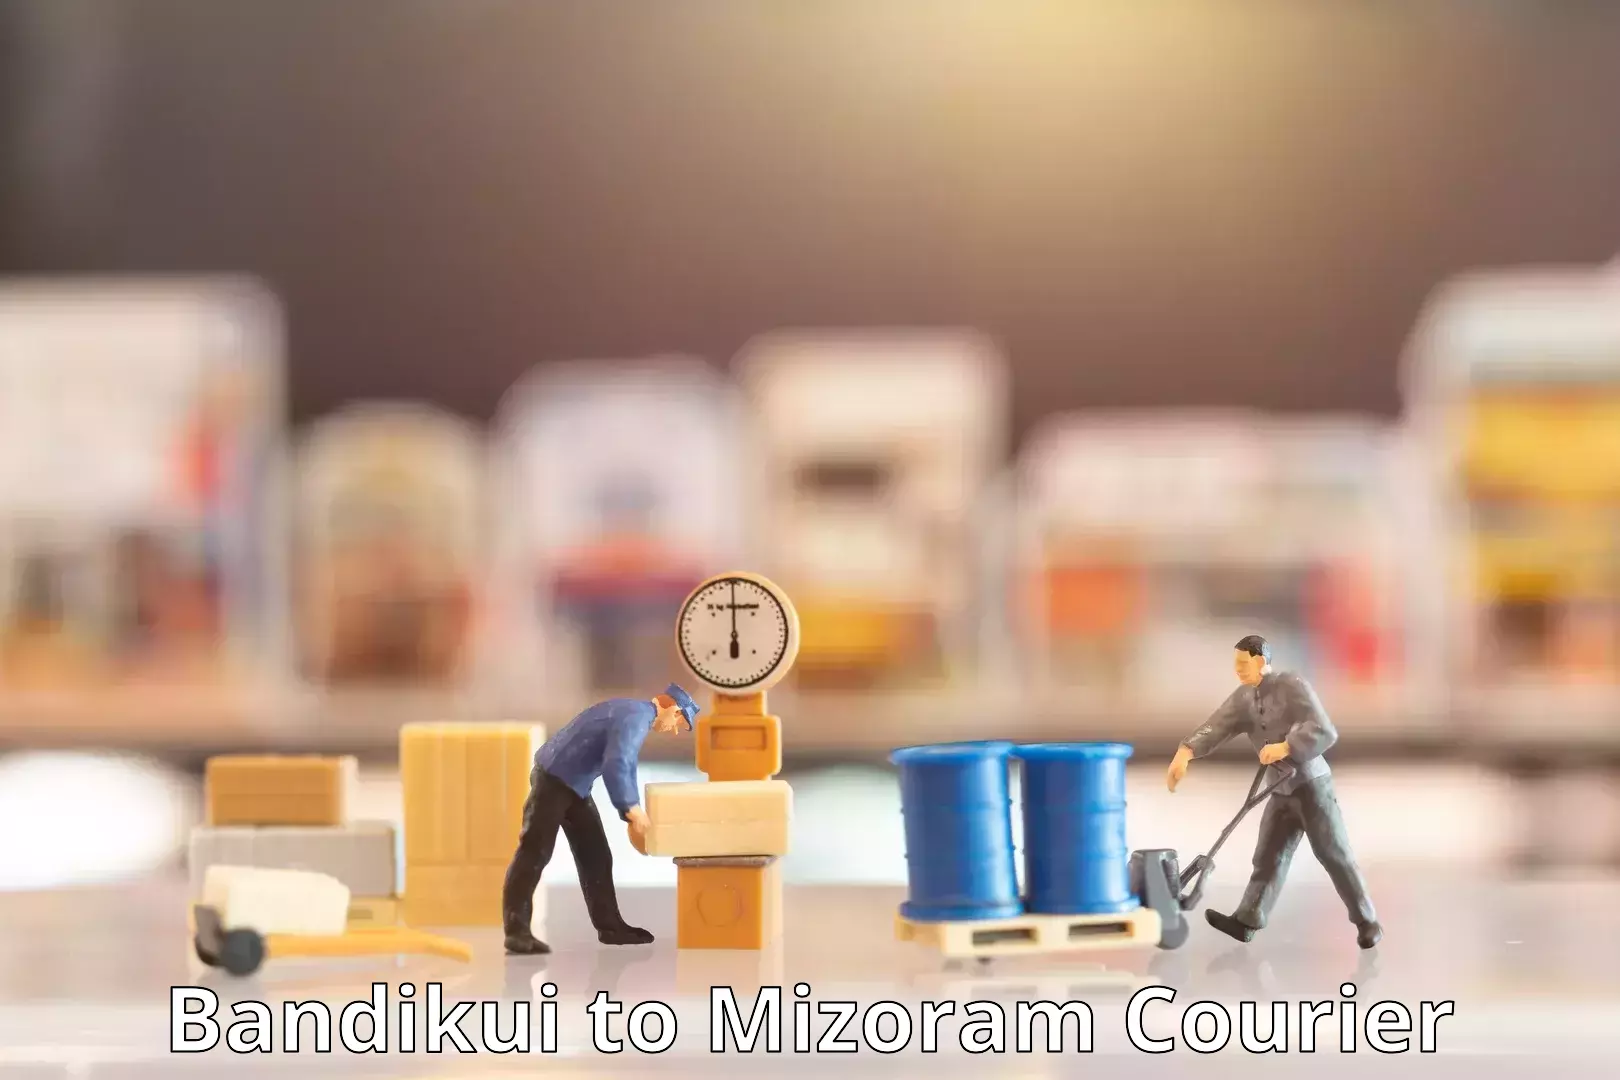 Courier dispatch services in Bandikui to Mizoram